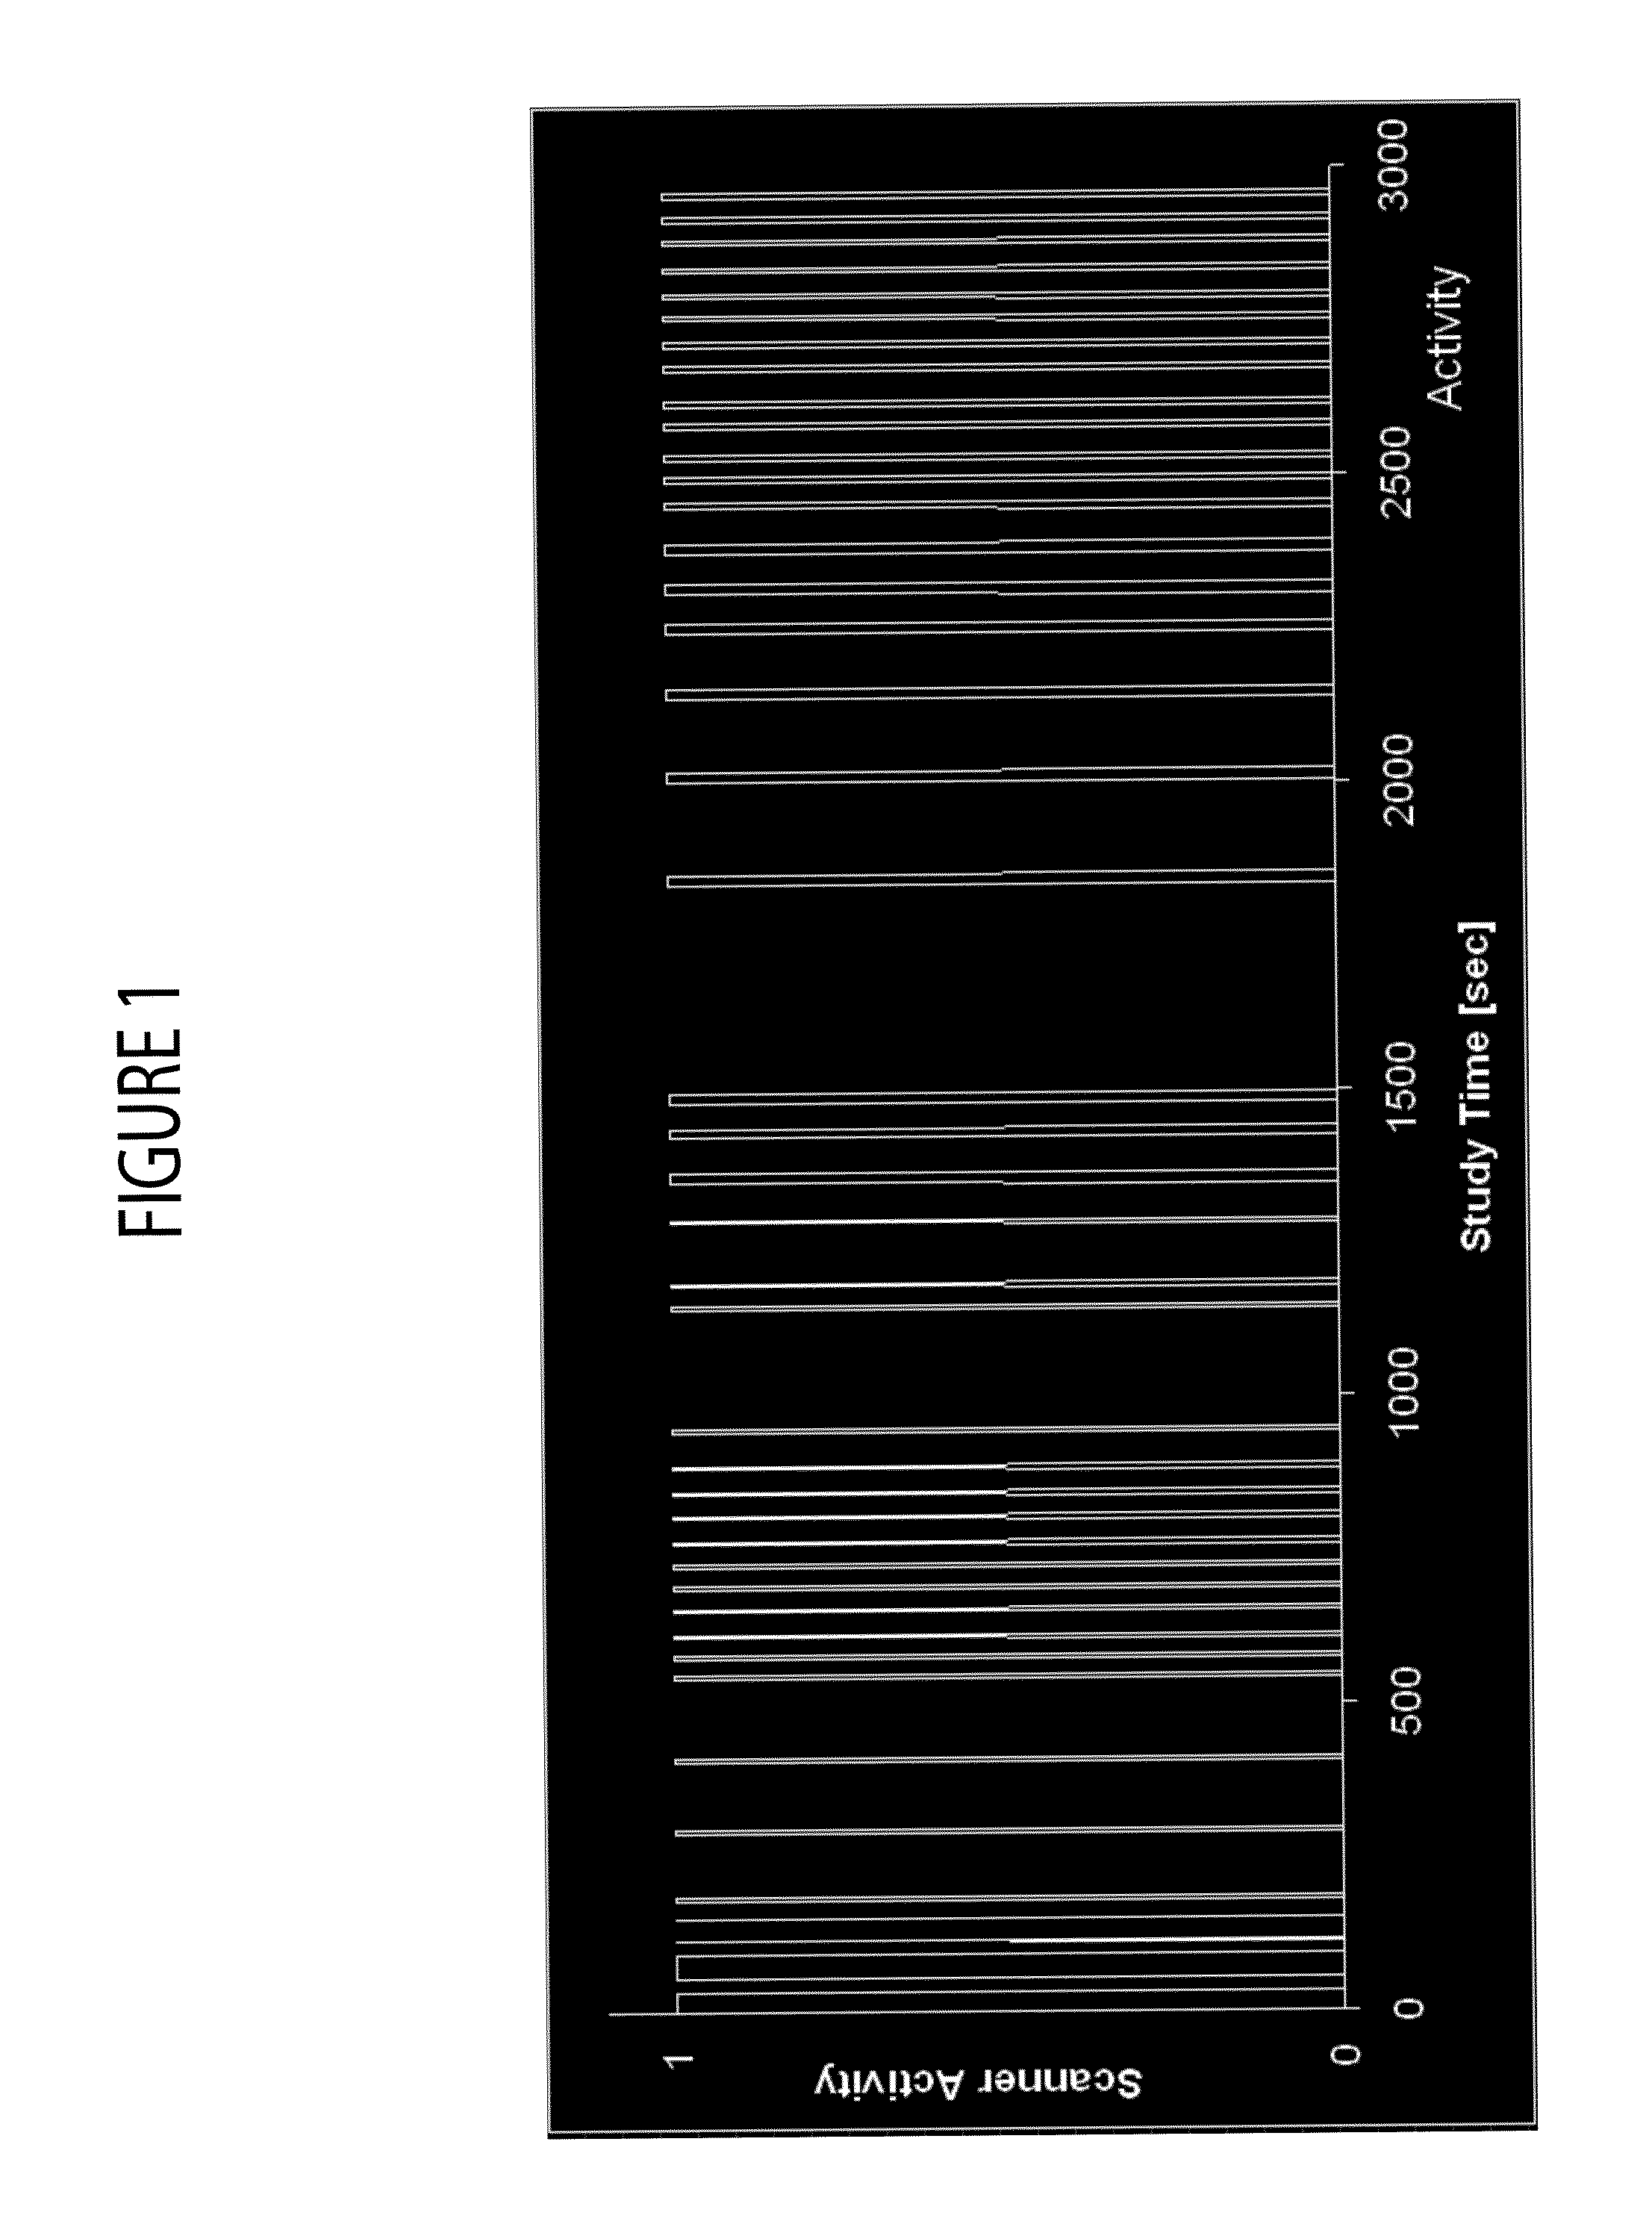 MR imaging system for automatically providing incidental findings